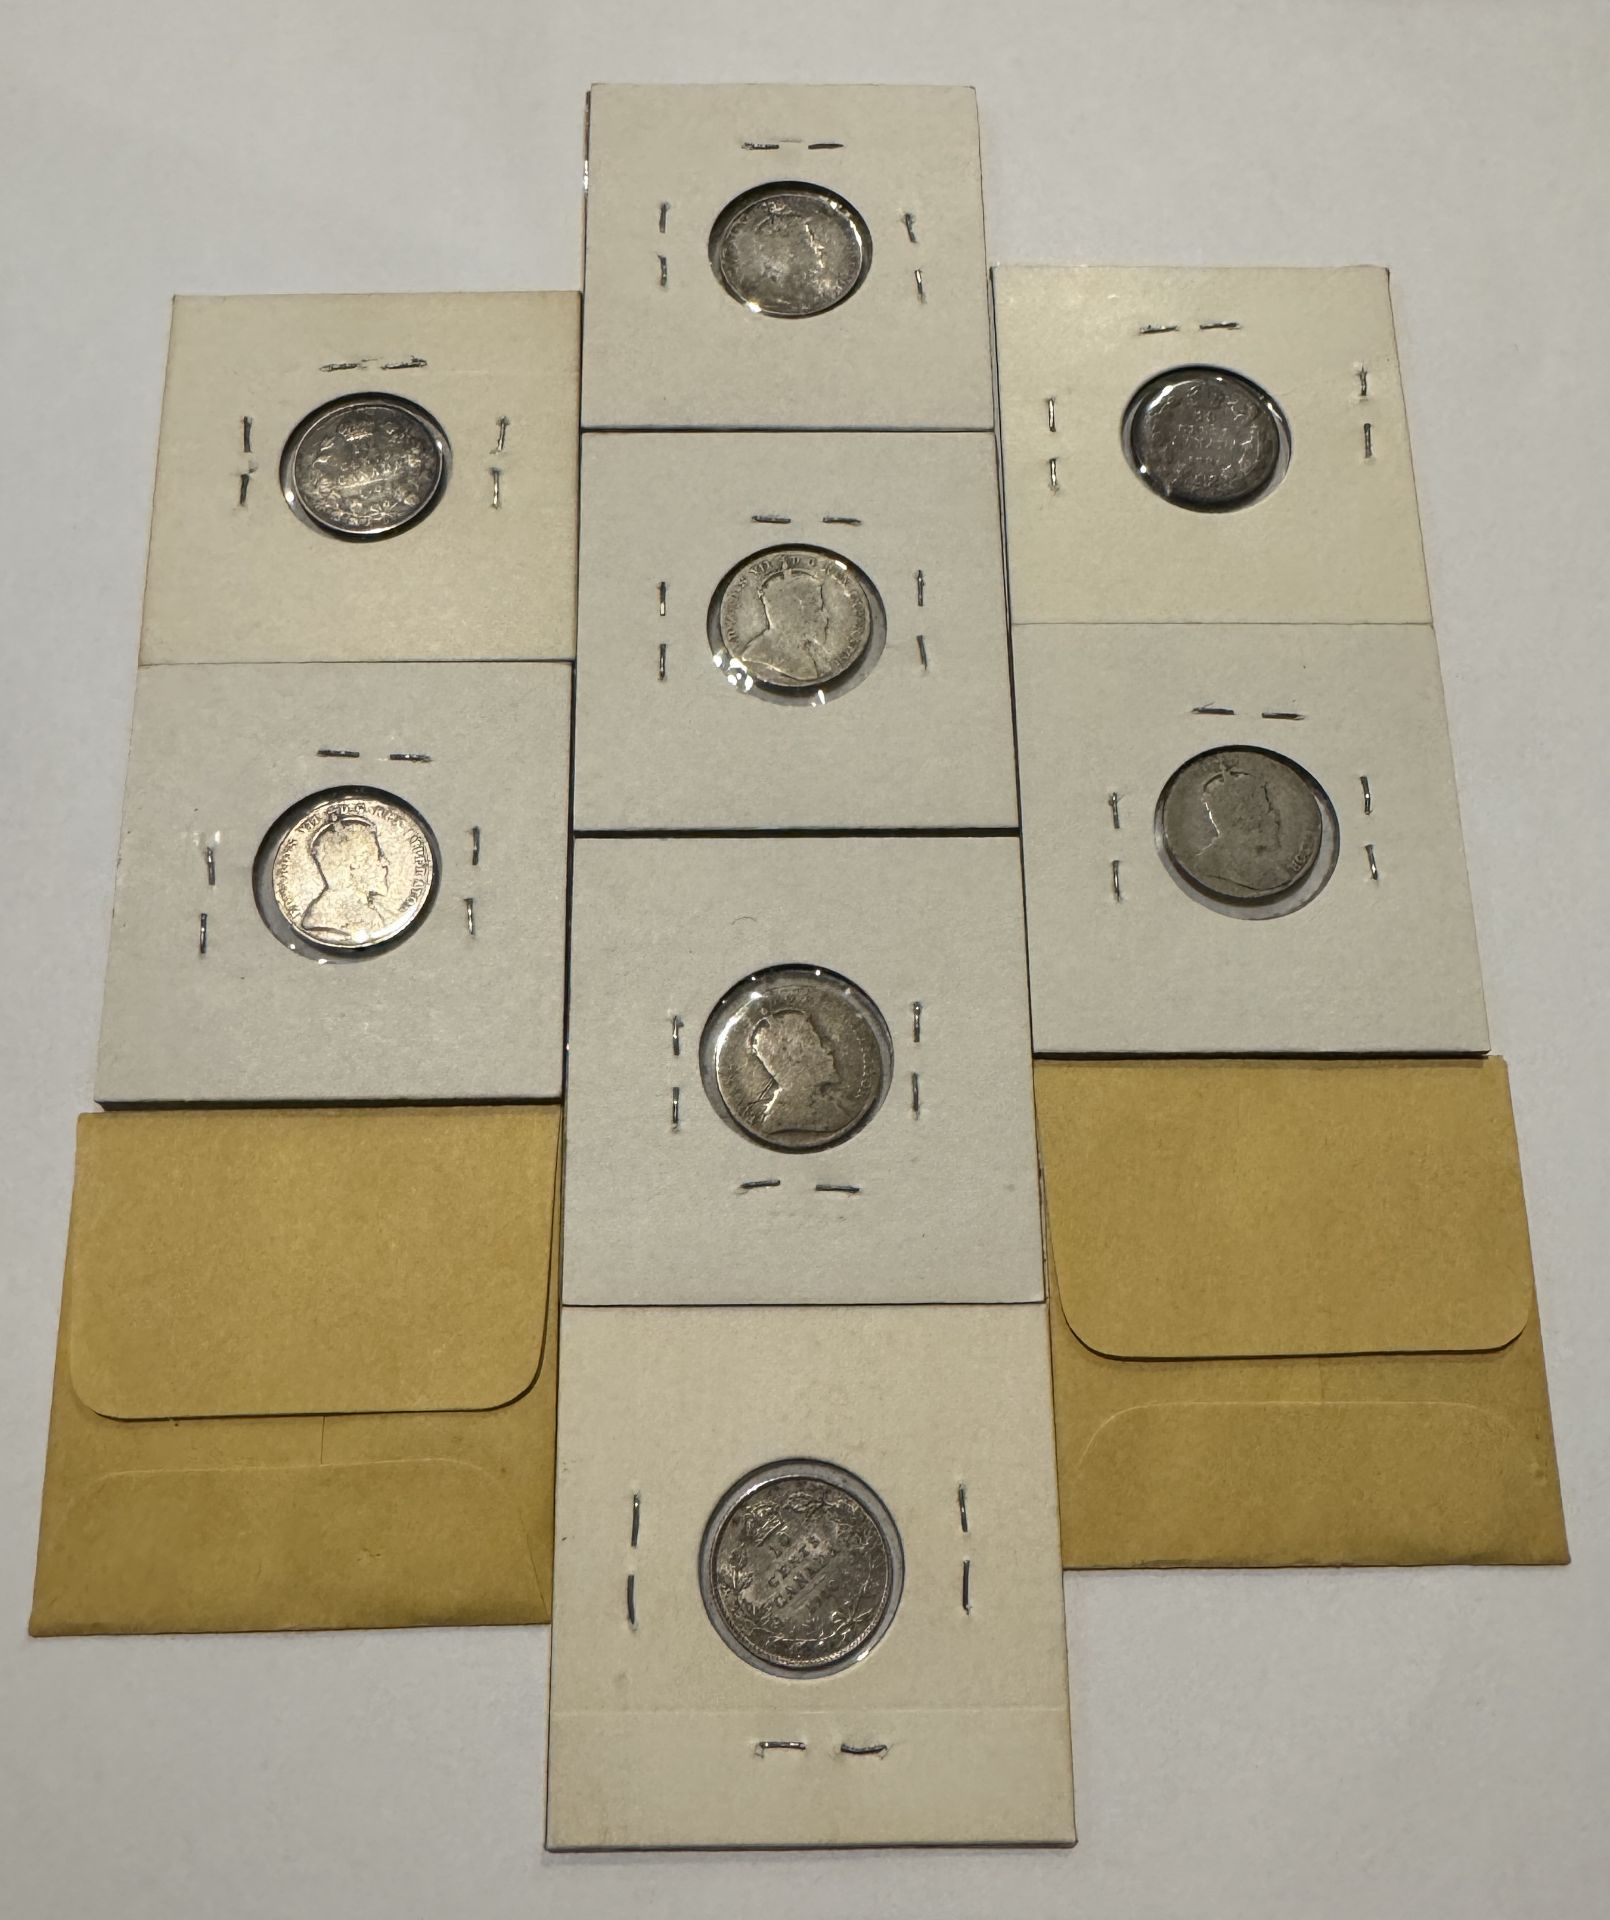 CANADA 10 CENT SILVER DIMES 1902-1910 COMPLETE RUN ADDITIONAL 1909 BOTH LEAVES COIN - Image 2 of 2